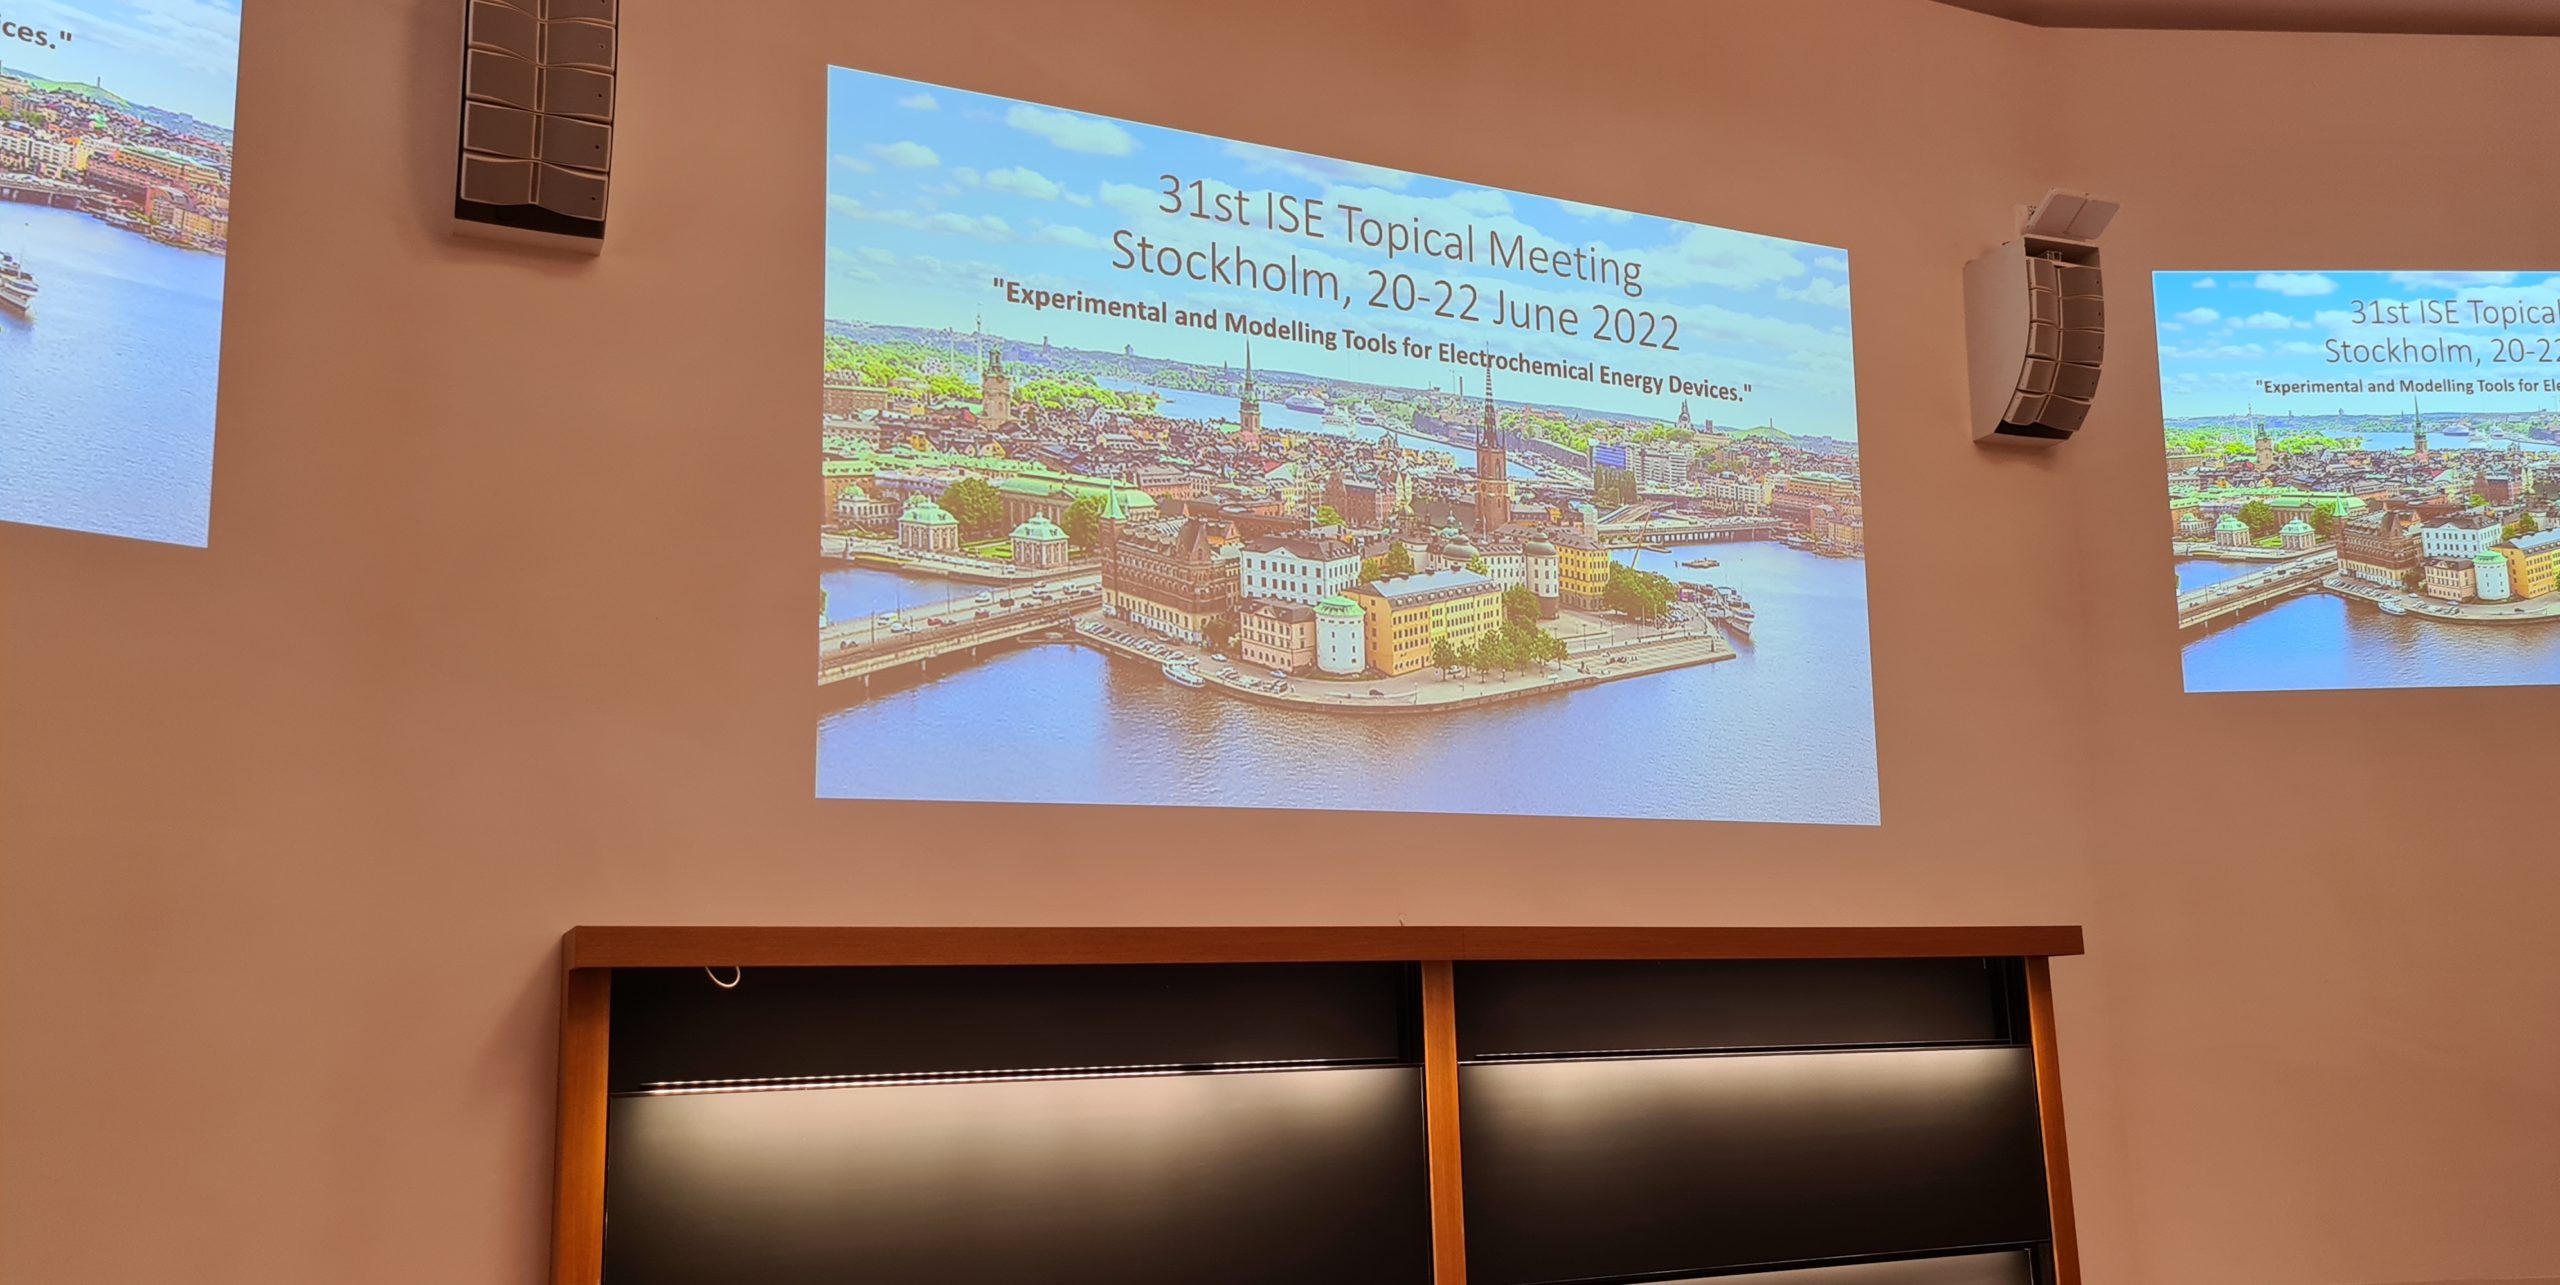 31st ISE Topical Meeting Stockholm